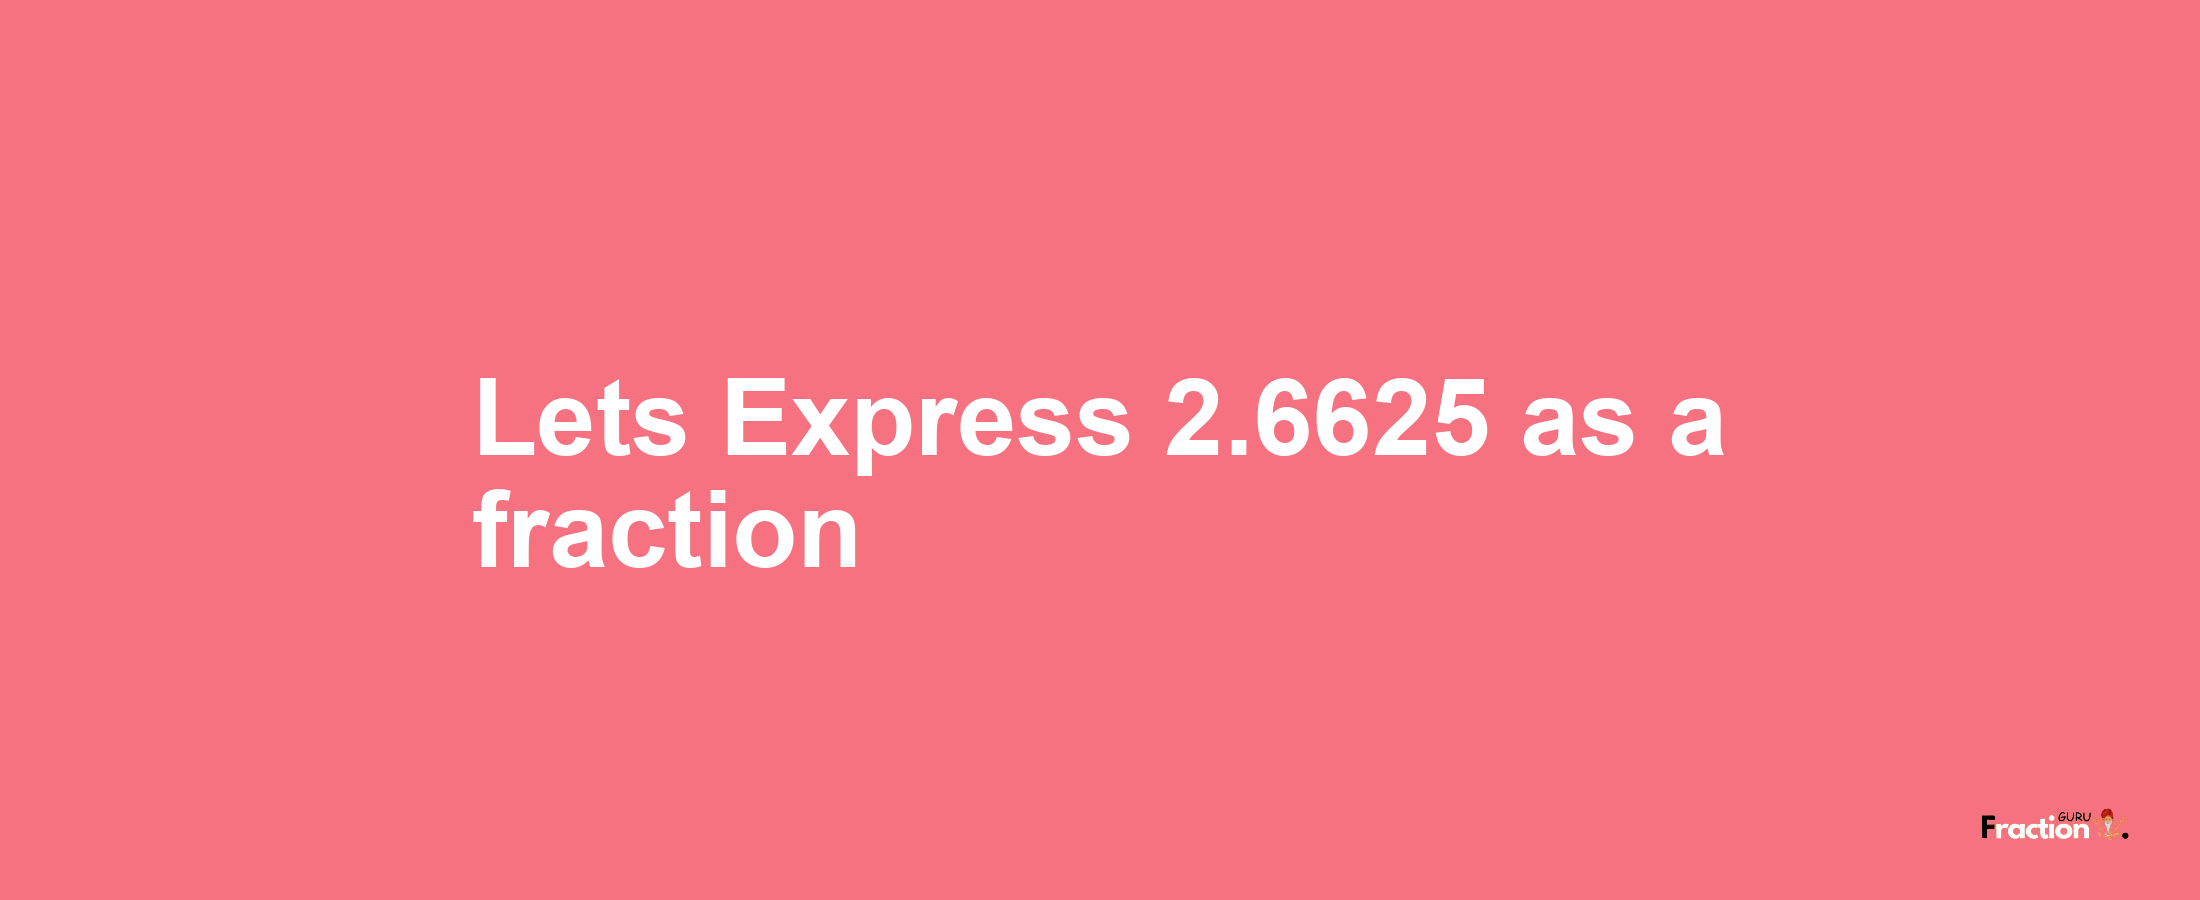 Lets Express 2.6625 as afraction